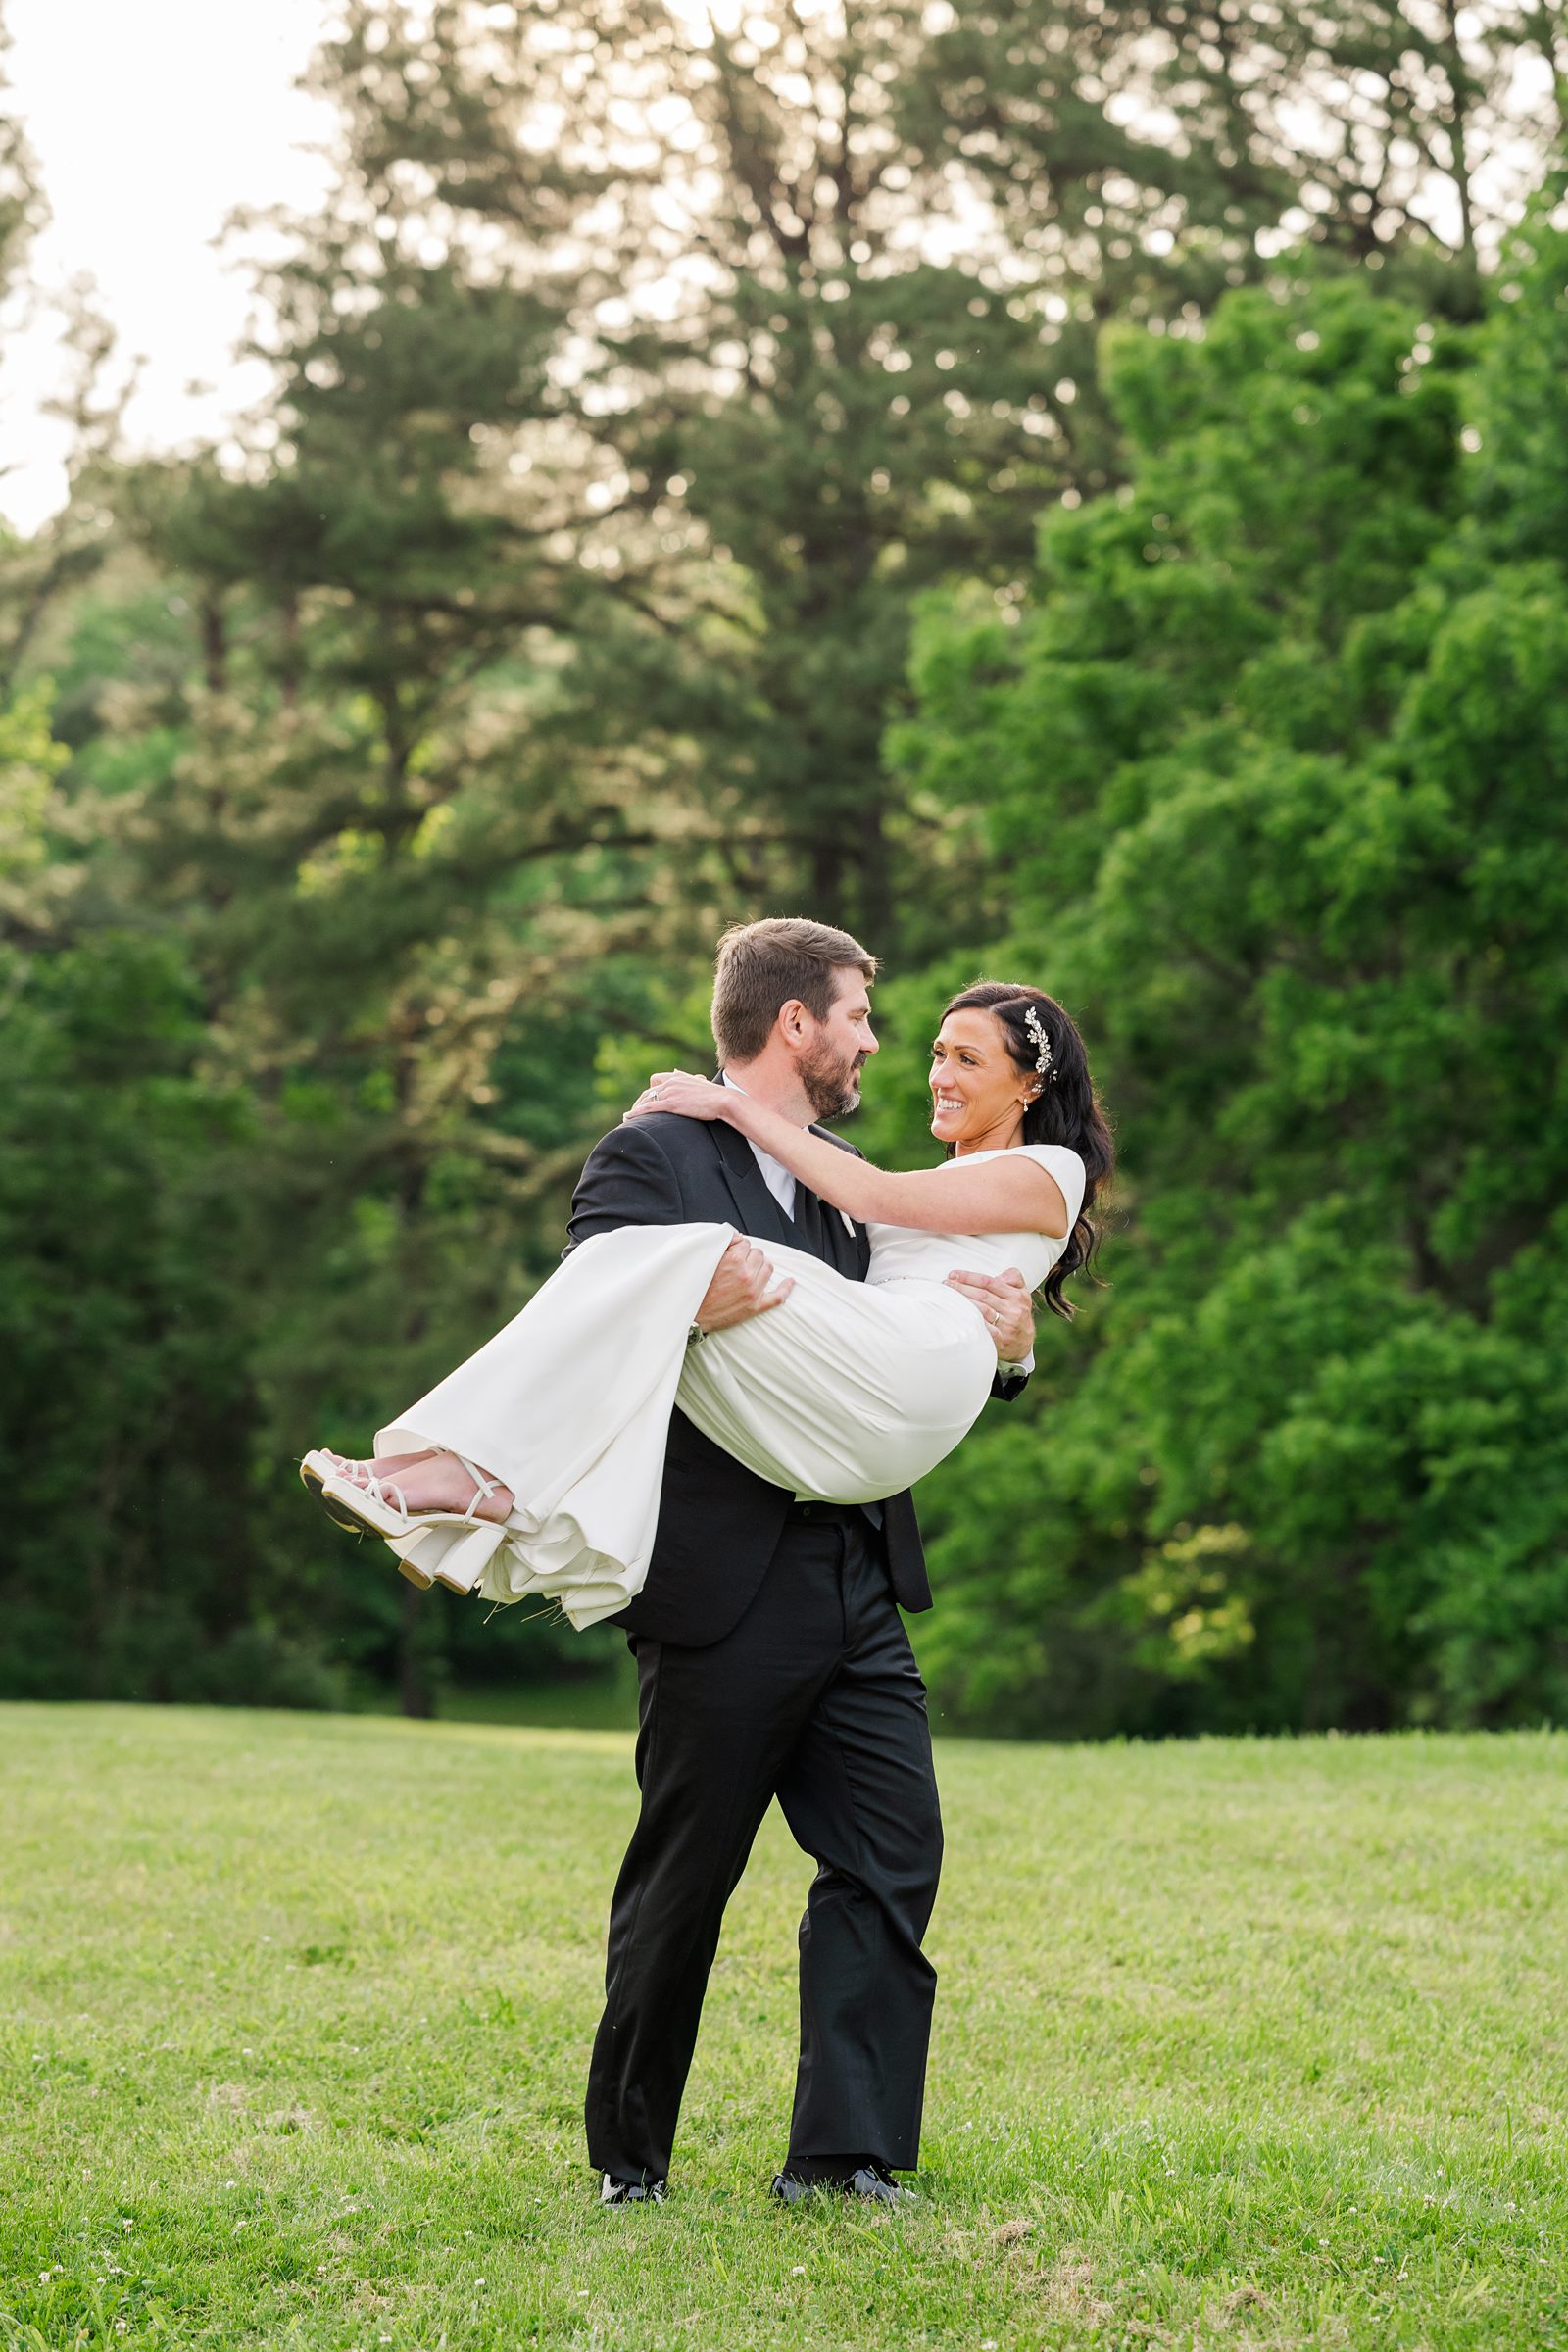 Bride and Groom portraits at a Spring Virginia Wedding in the backyard 